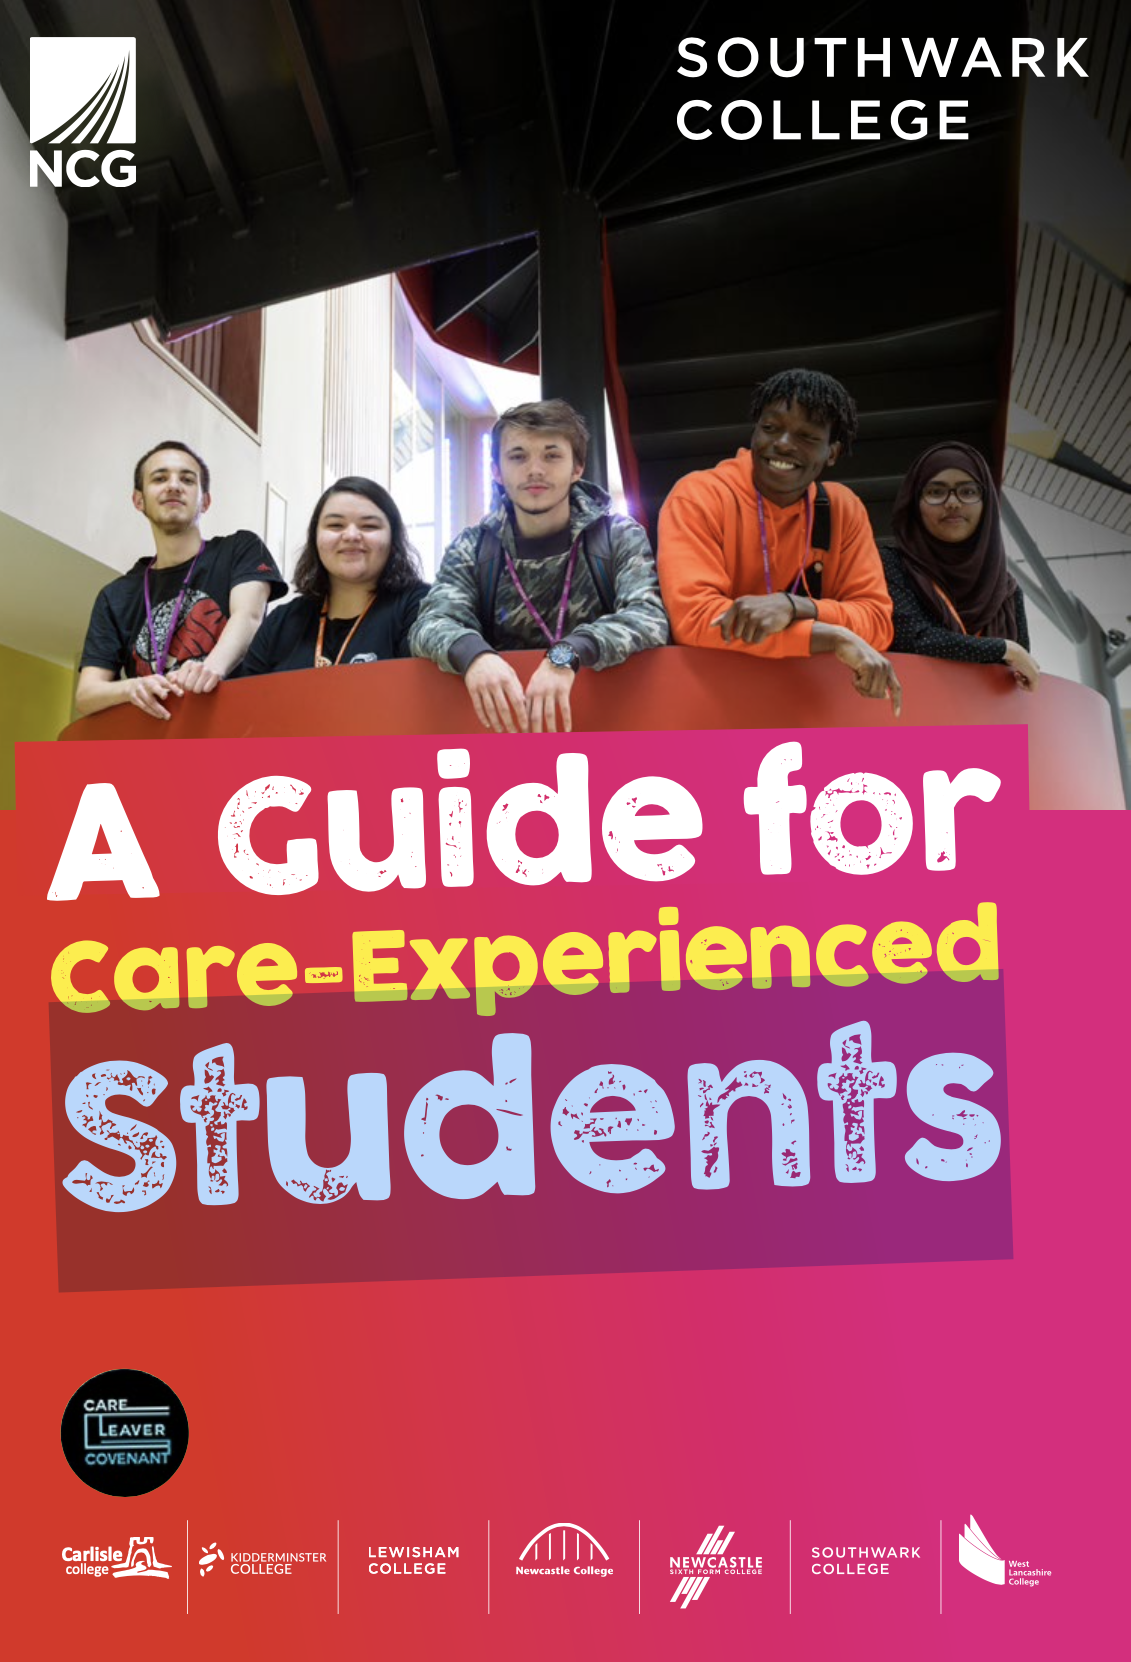 Care exp students